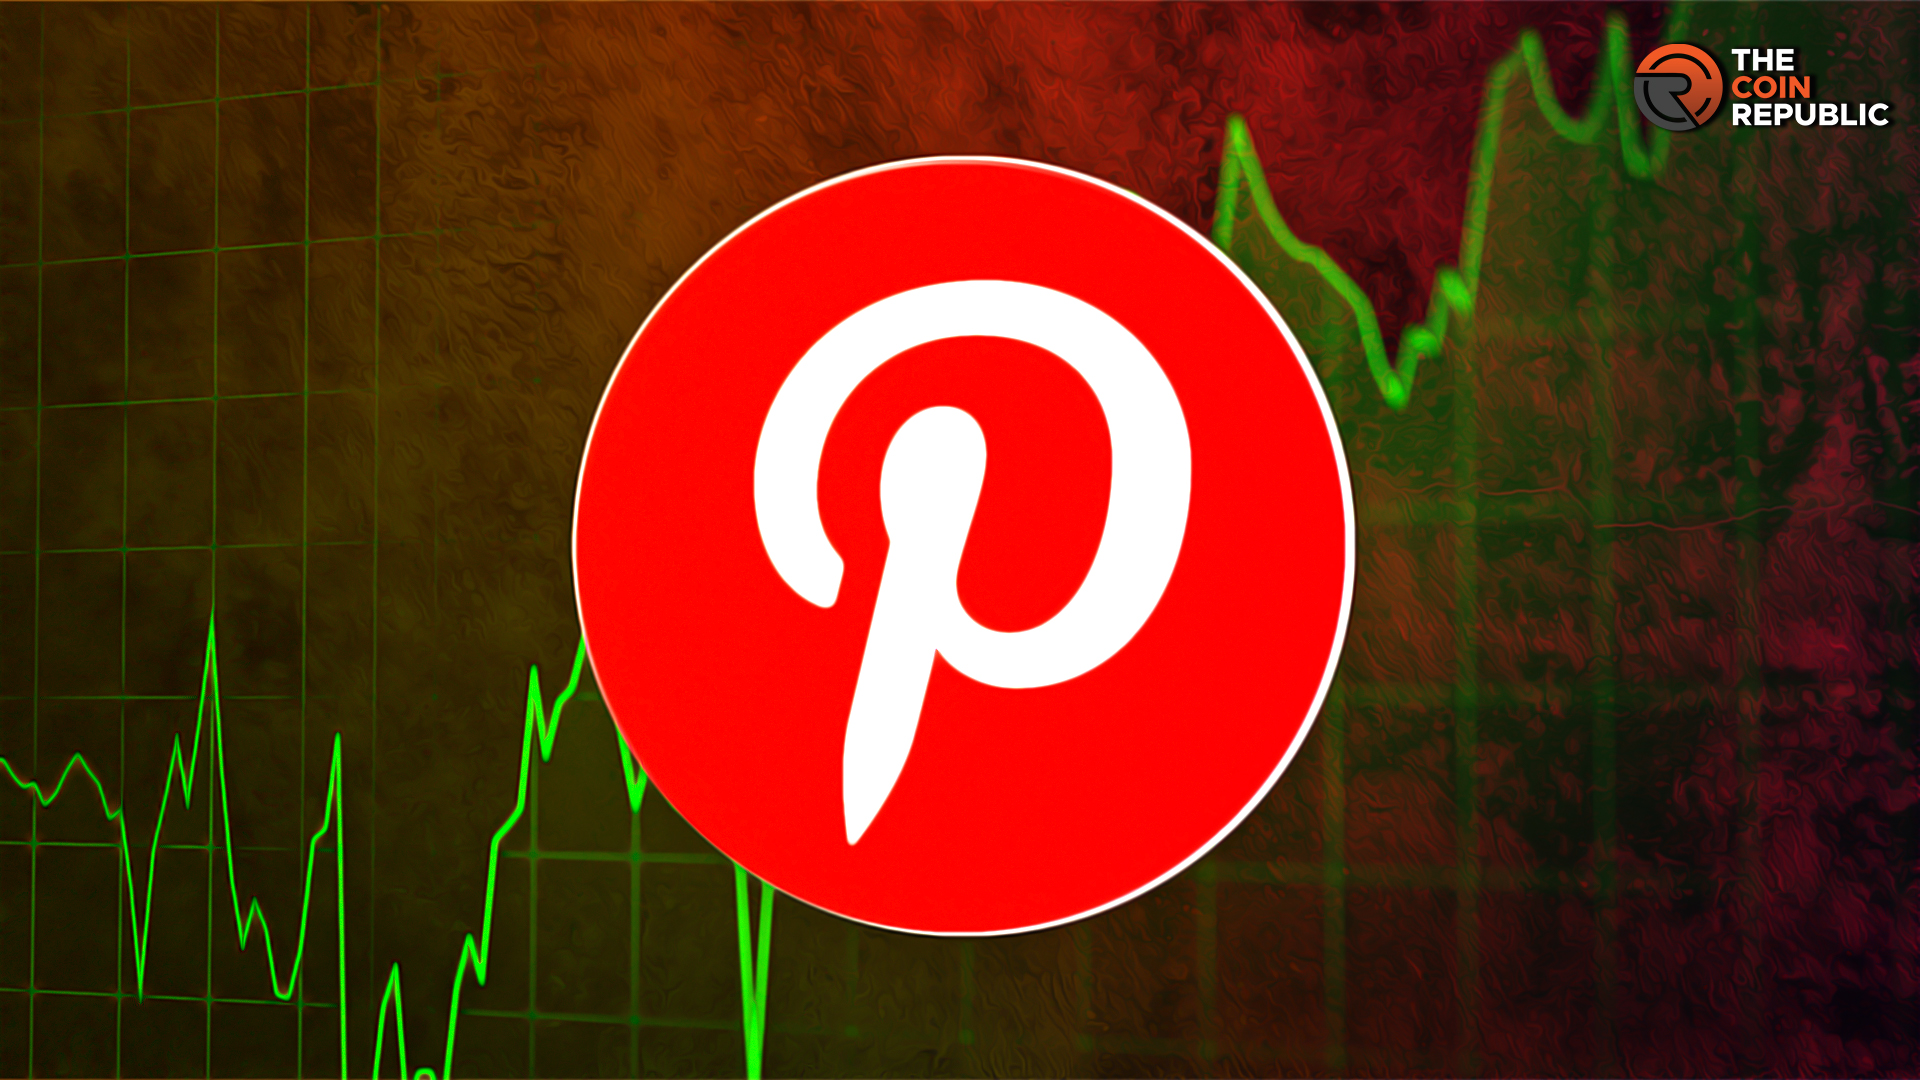 Pinterest Stock: What Next in PINS Stock Price – $20 or $30?